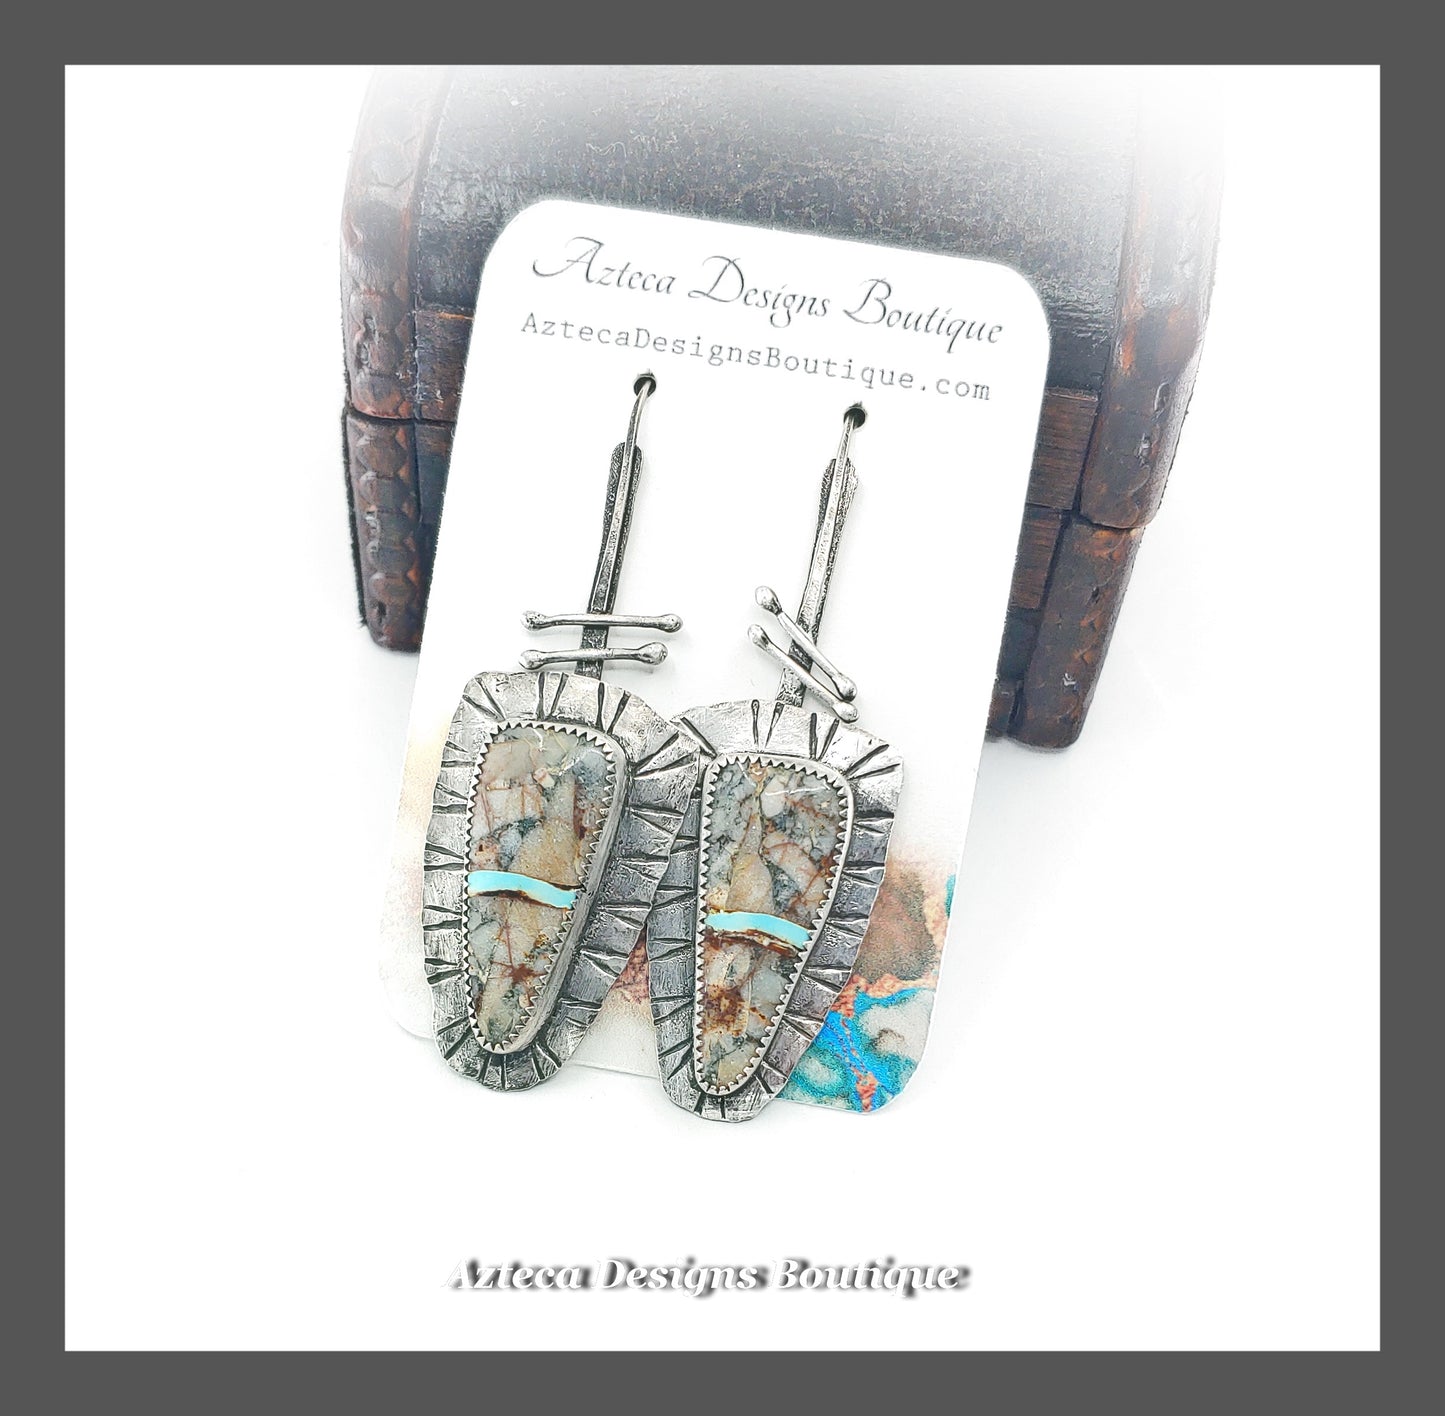 Royston Ribbon Turquoise Earrings + Hand Fabricated Sterling Silver